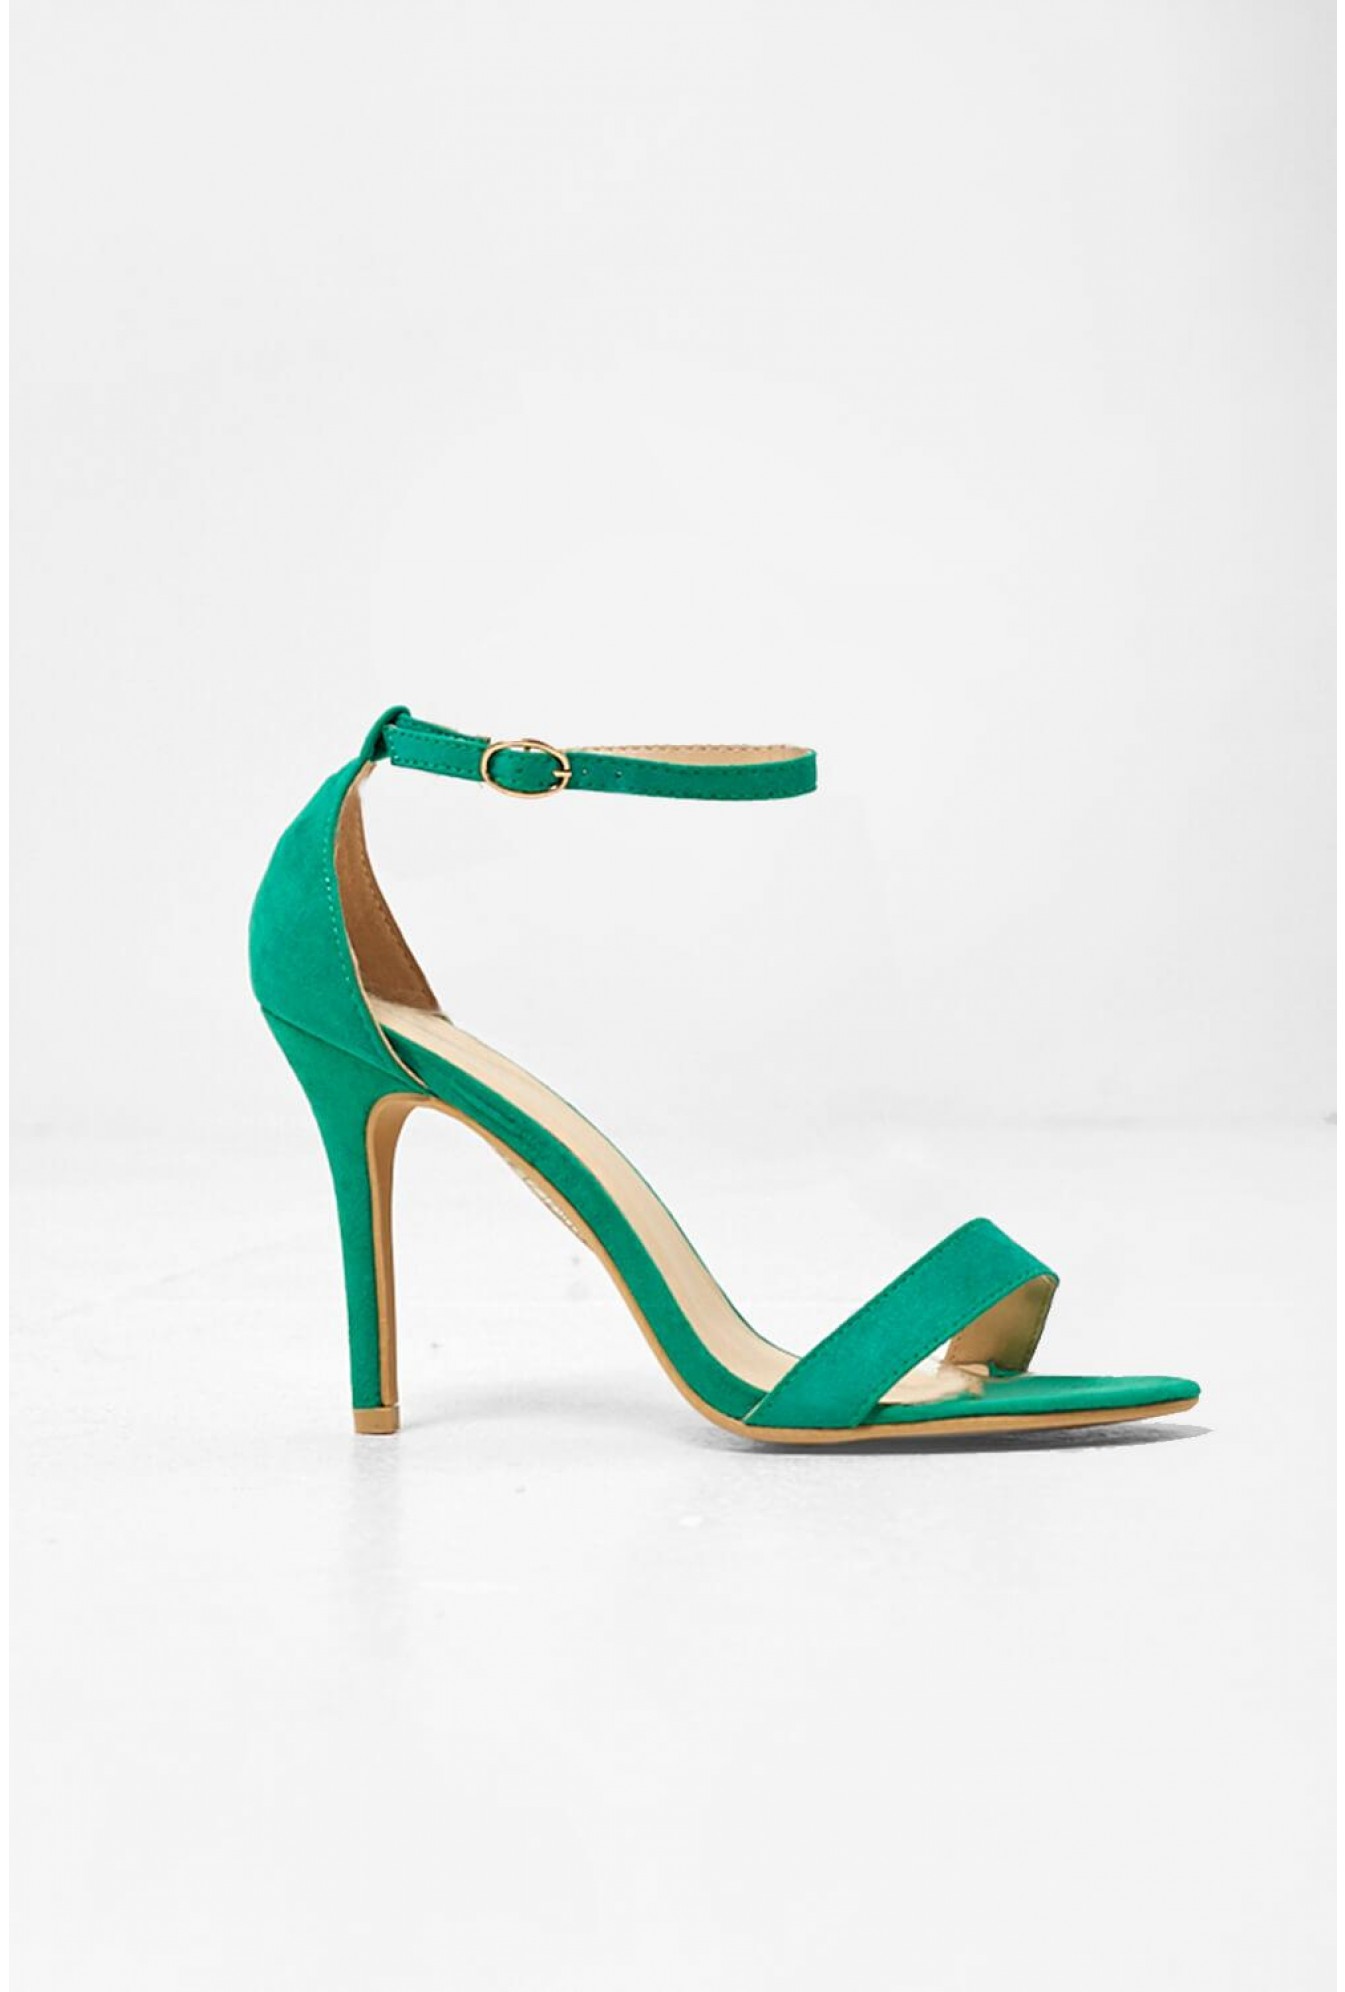 barely there sandal heels